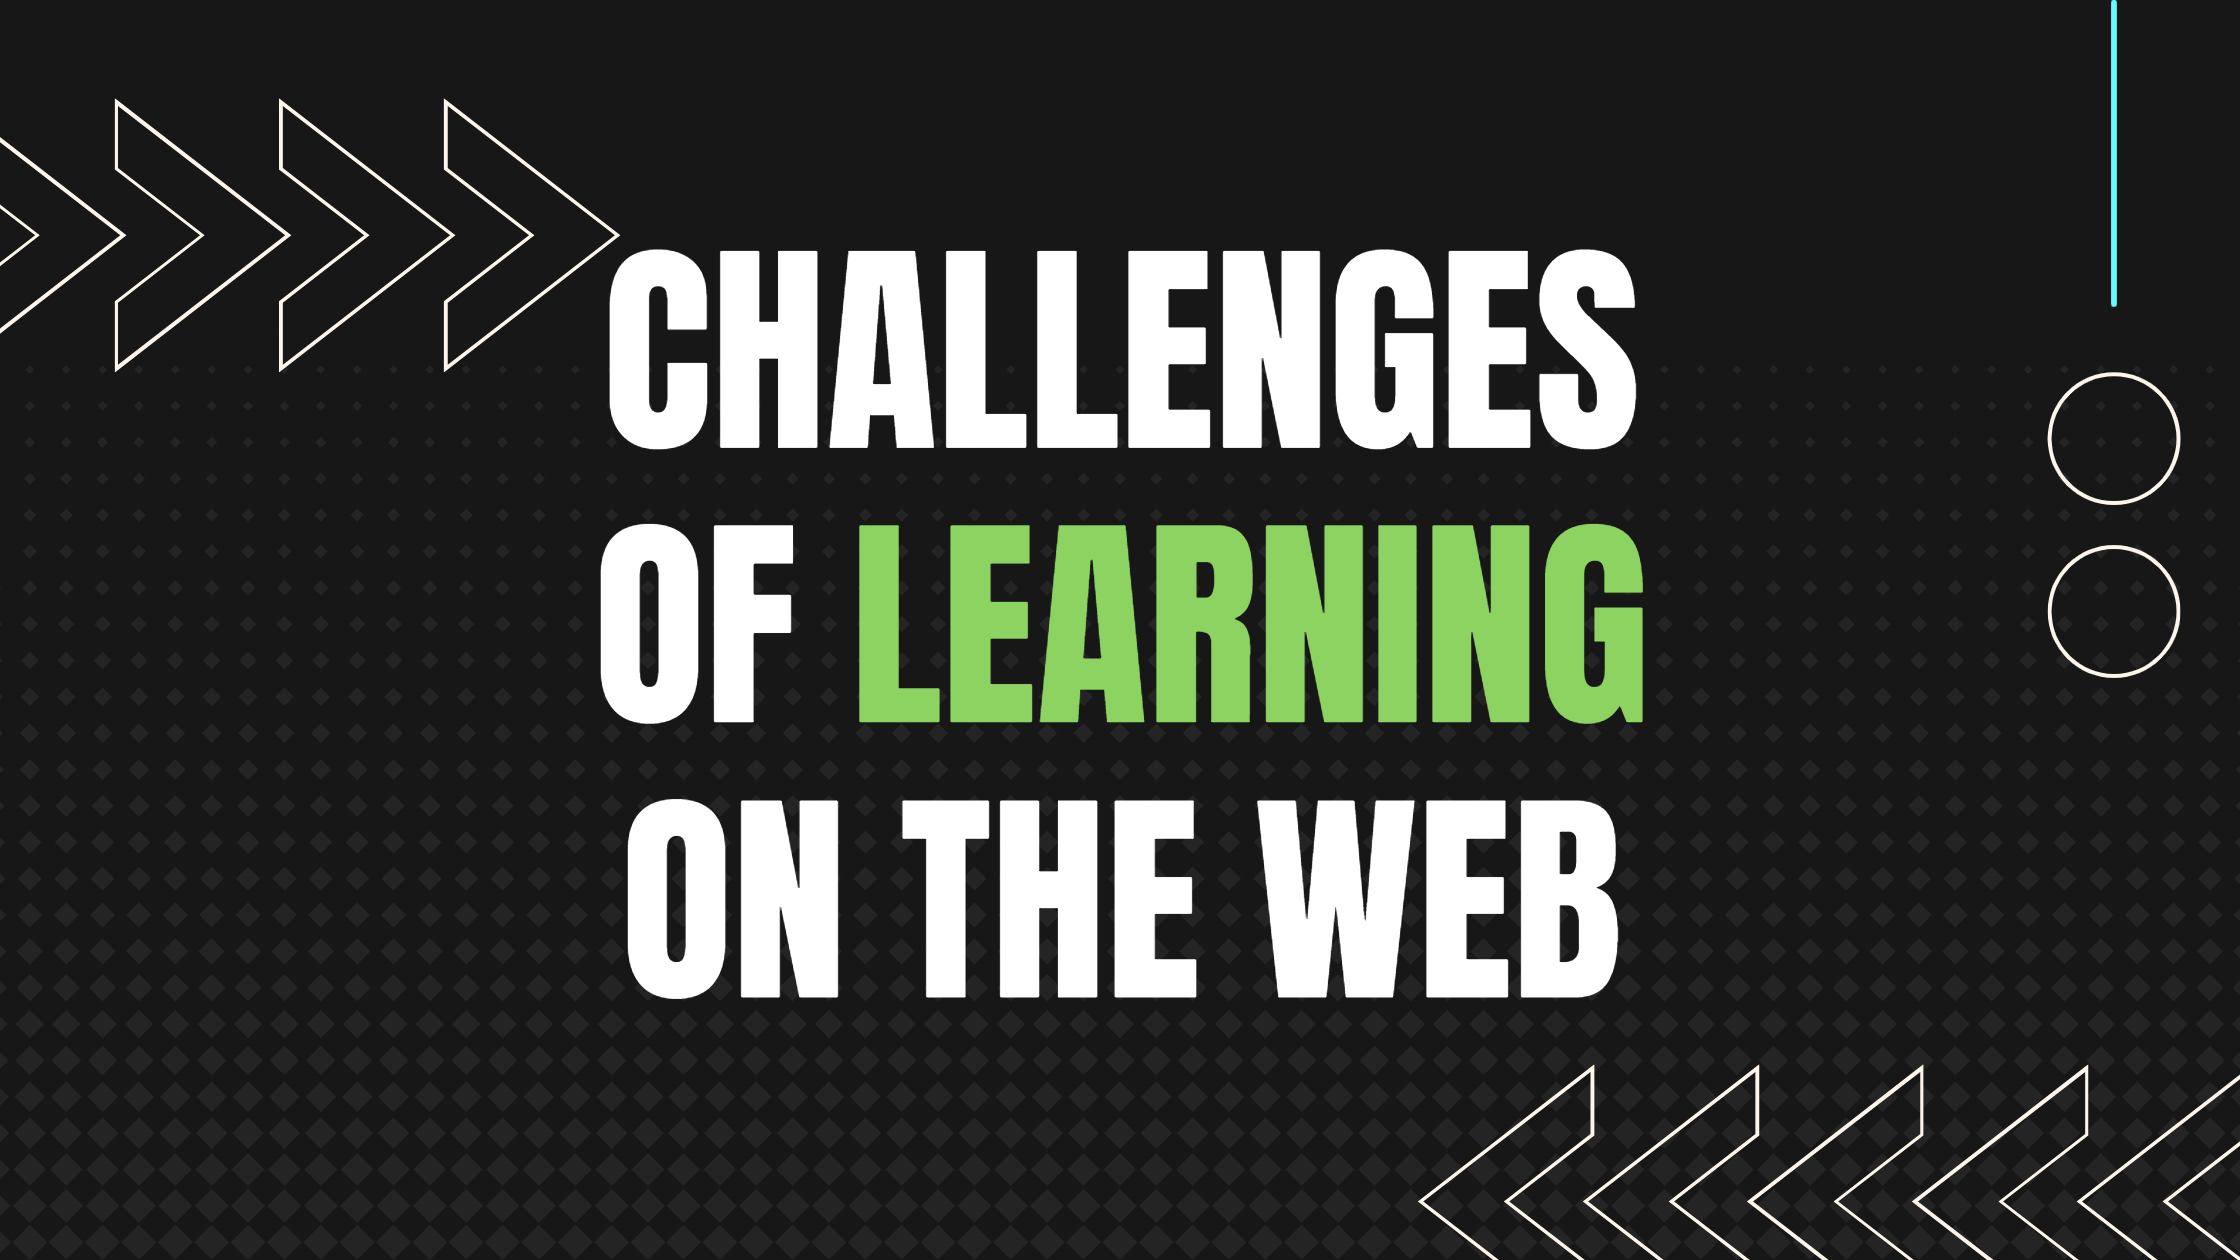 The challenge of learning something on the web